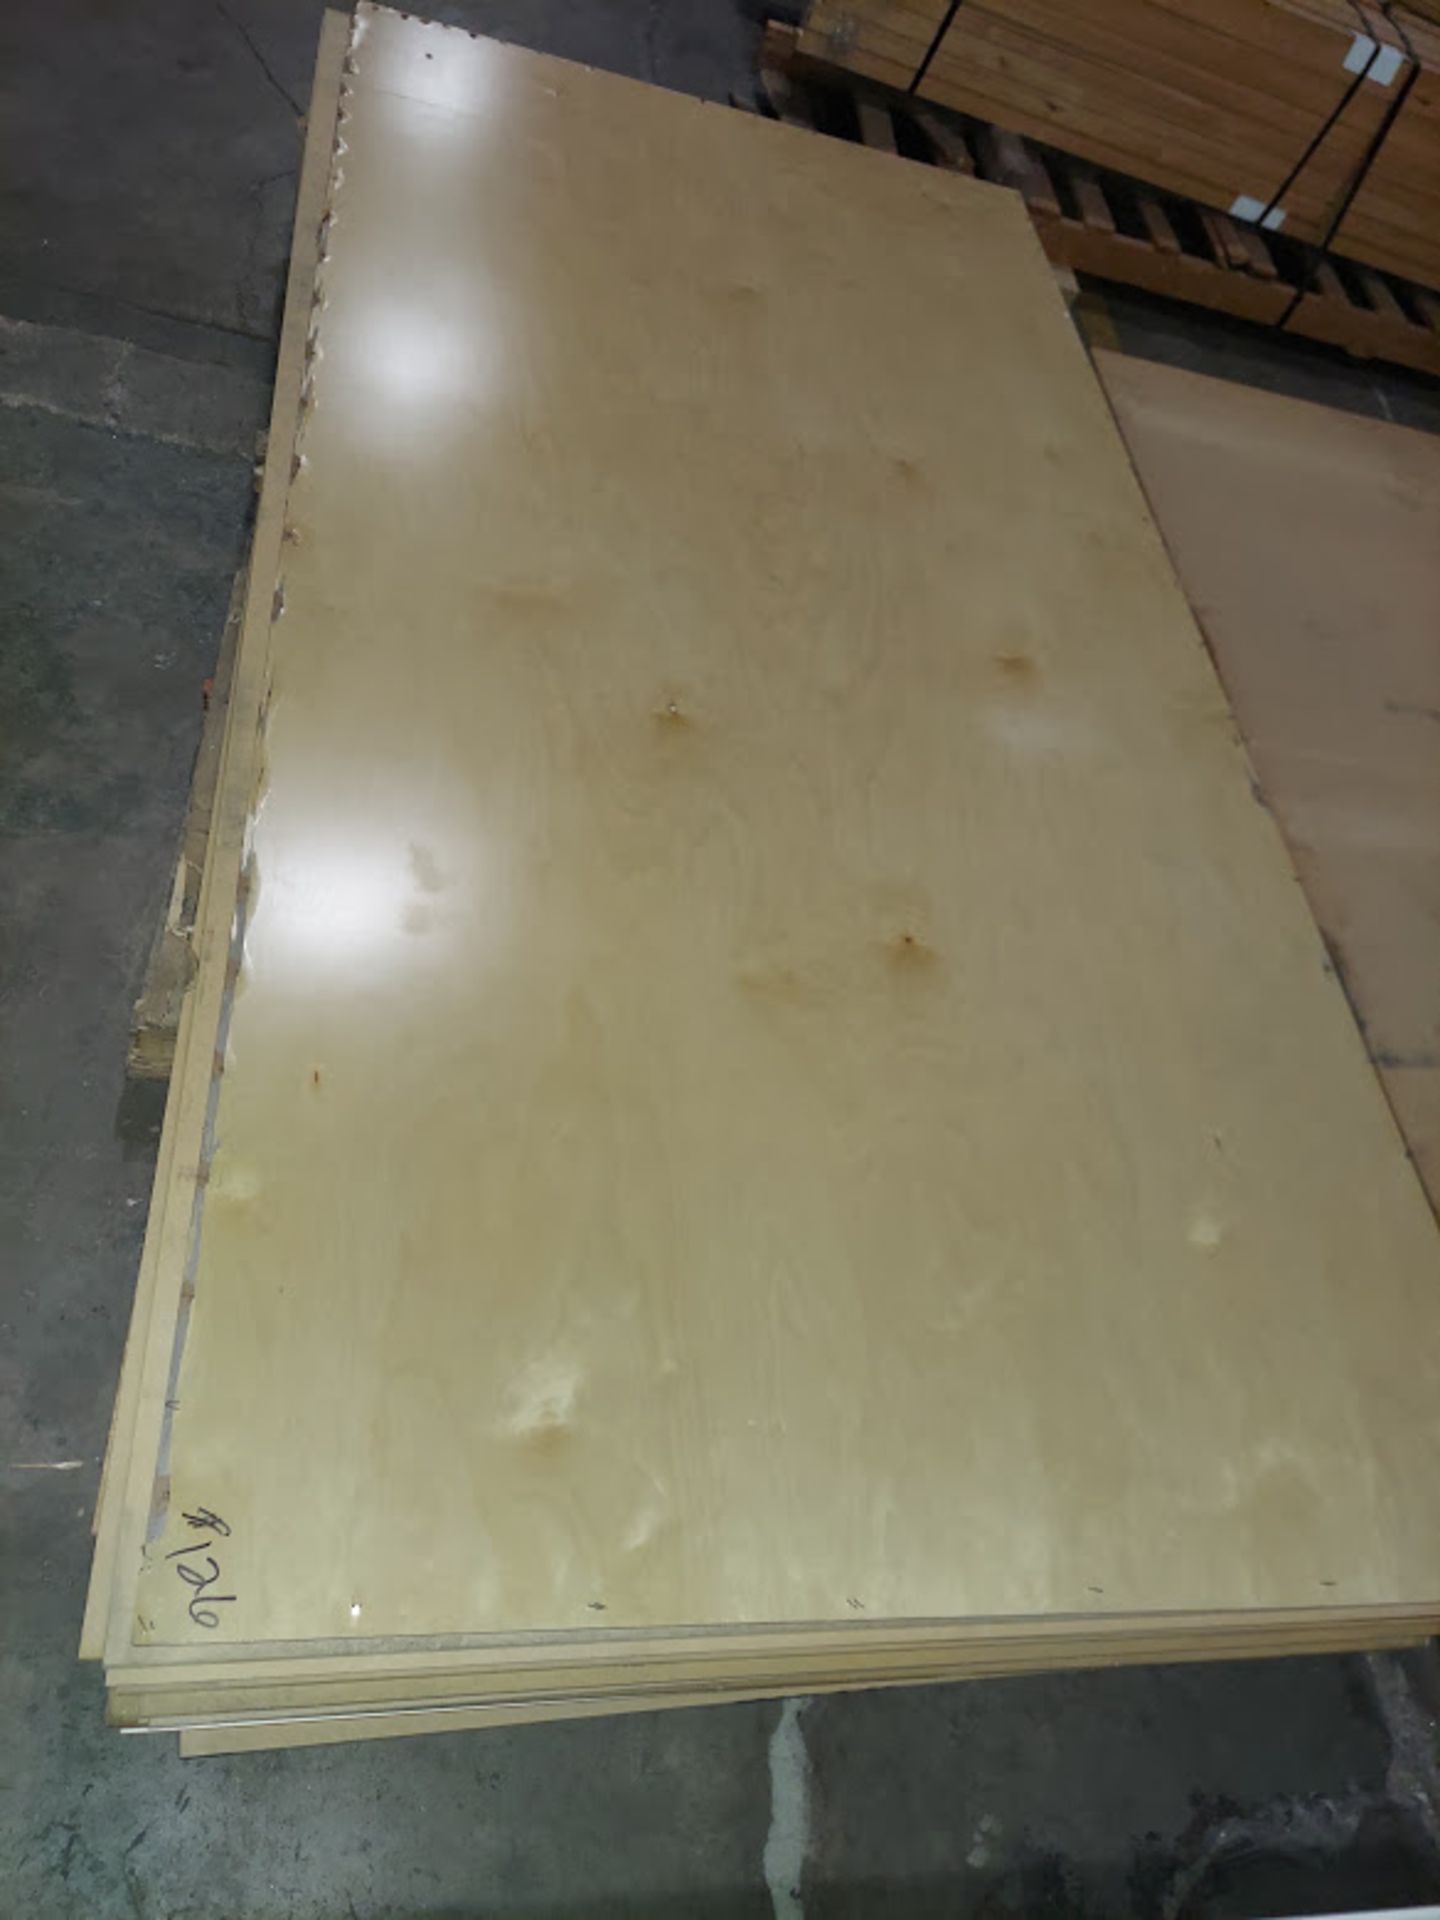 Lot of Misc. MDF, PBC, Plywood 4'x8' Sheets, 1/8", 1/4", 1/2", 3/4"